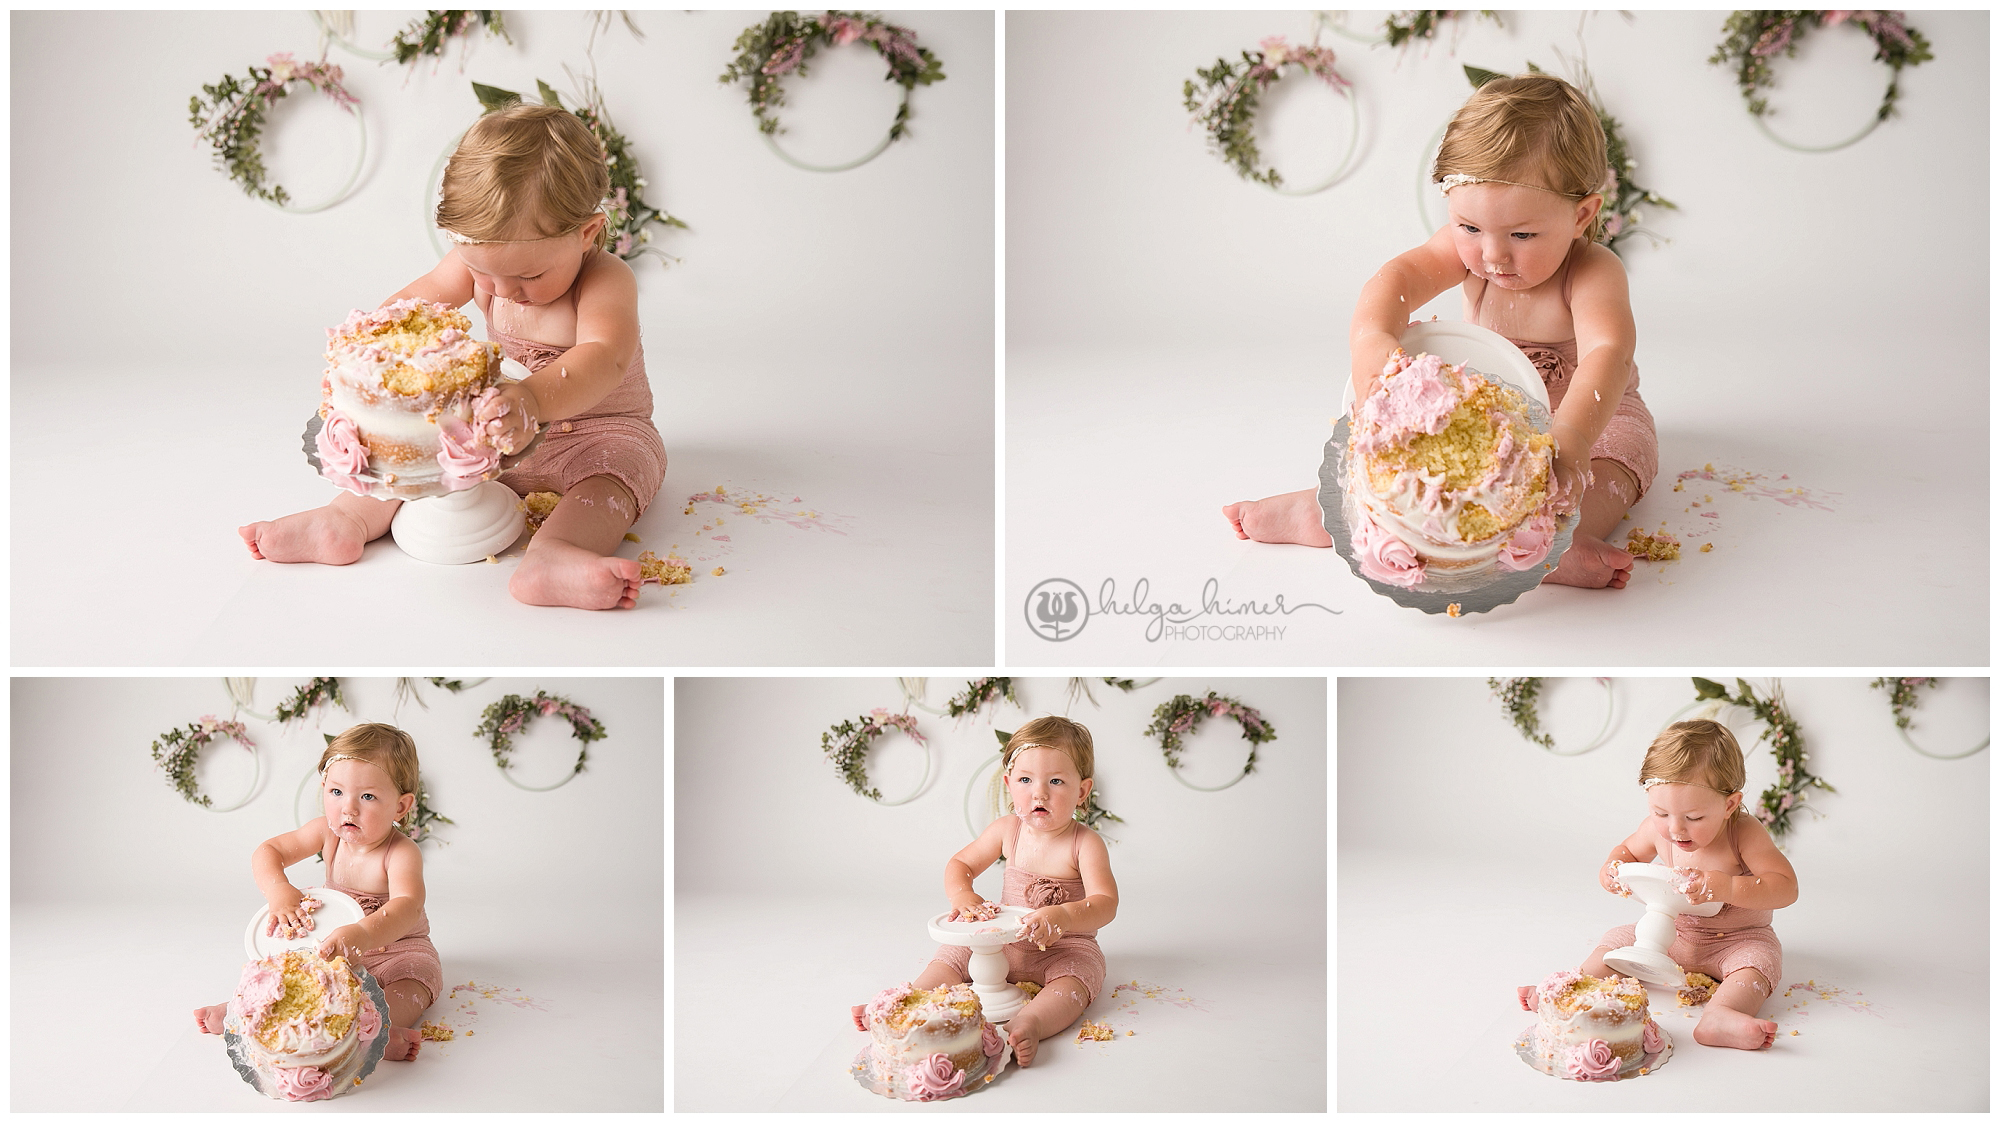 boho themed cake smash photography session the girl in pink outfit bumping her naked cake to the floor